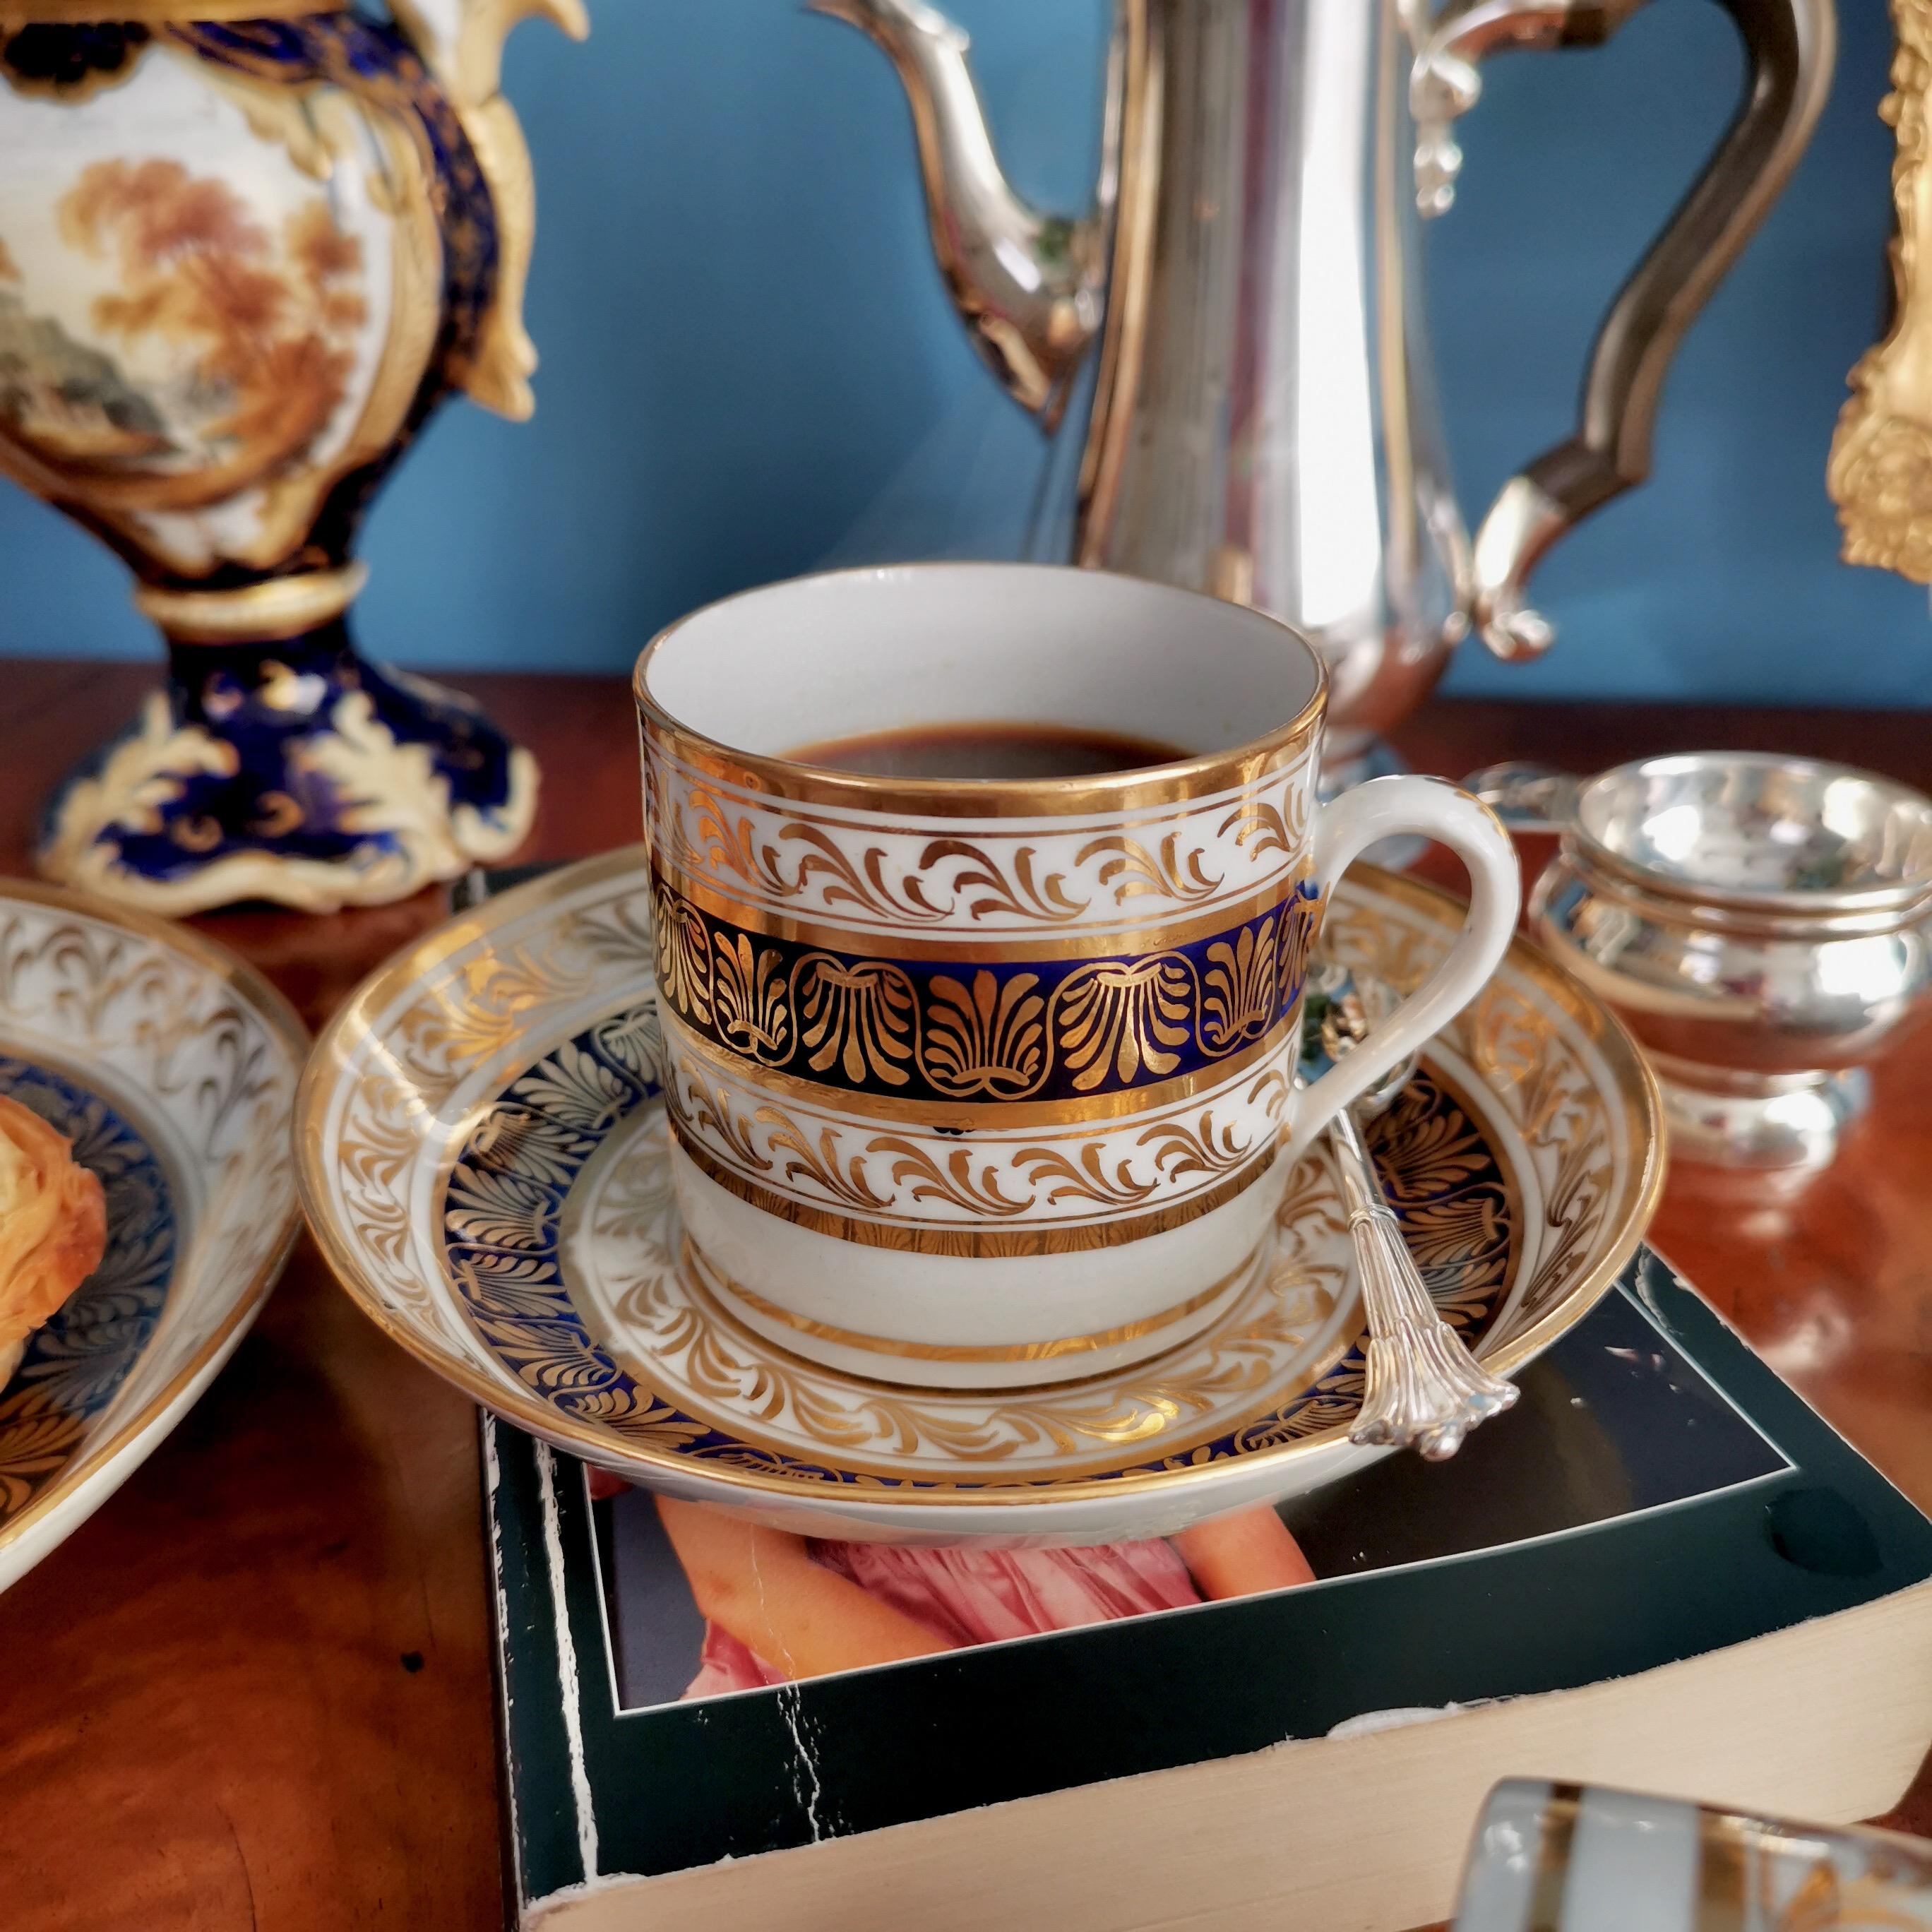 This is a beautiful coffee can and saucer made by New Hall around the year 1810. The set was an extra belonging to a large tea service, which is listed in a separate listing.
 
The New Hall factory started as a cooperative of several Staffordshire